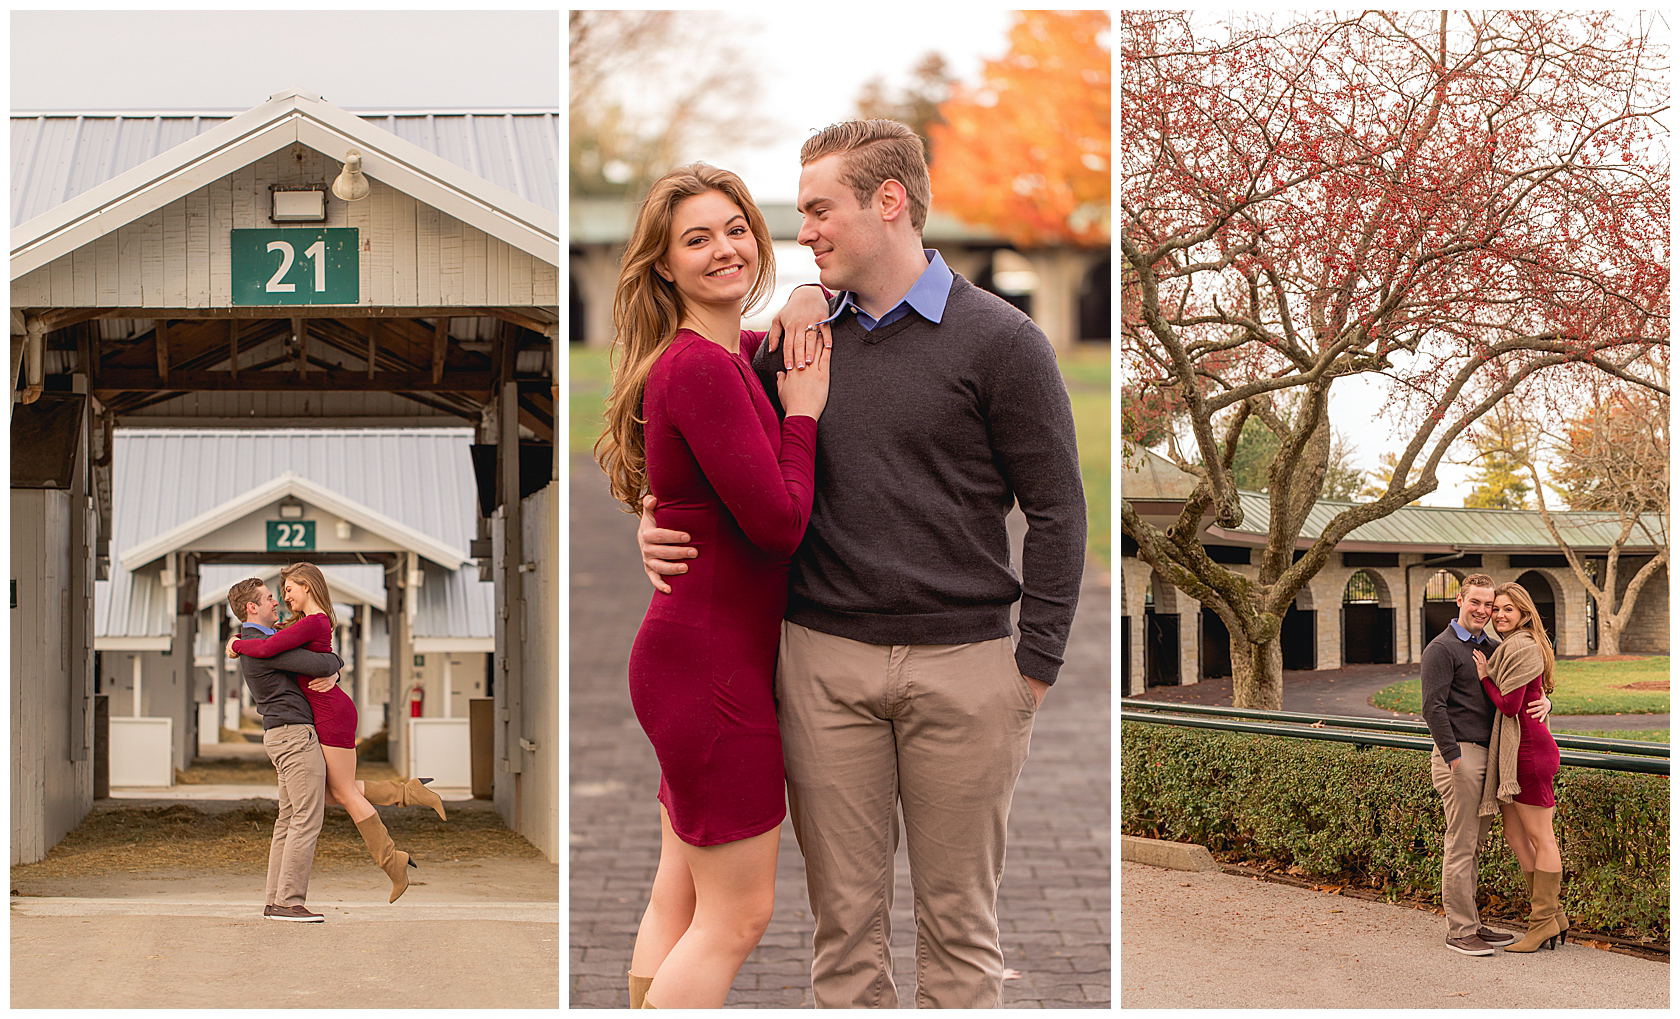 Engagement Session at Keeneland Racecourse in Lexington, Kentucky.